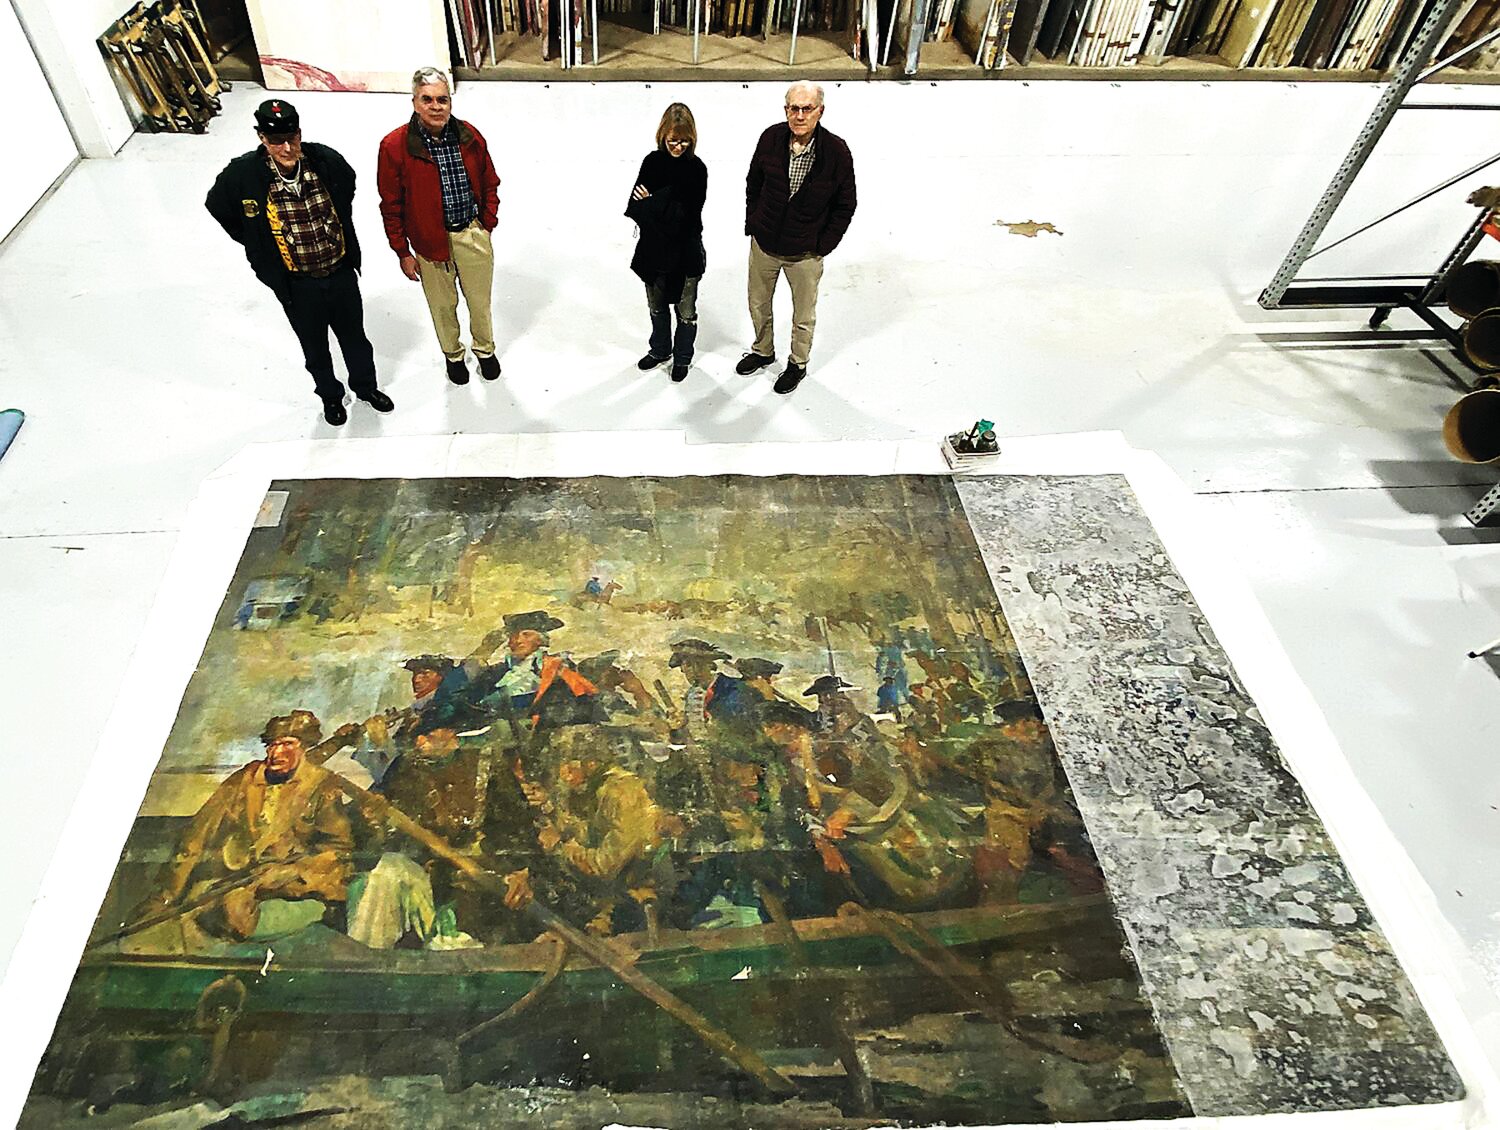 Conservator Christyl Cusworth, second from right, and Washington Crossing Park Association trustees, gather around a 15-foot, 6-inch by 9-foot, 8-inch mural by American muralist George Matthews Harding, which was unearthed and is being restored by the volunteer friends group of Washington Crossing State Park.